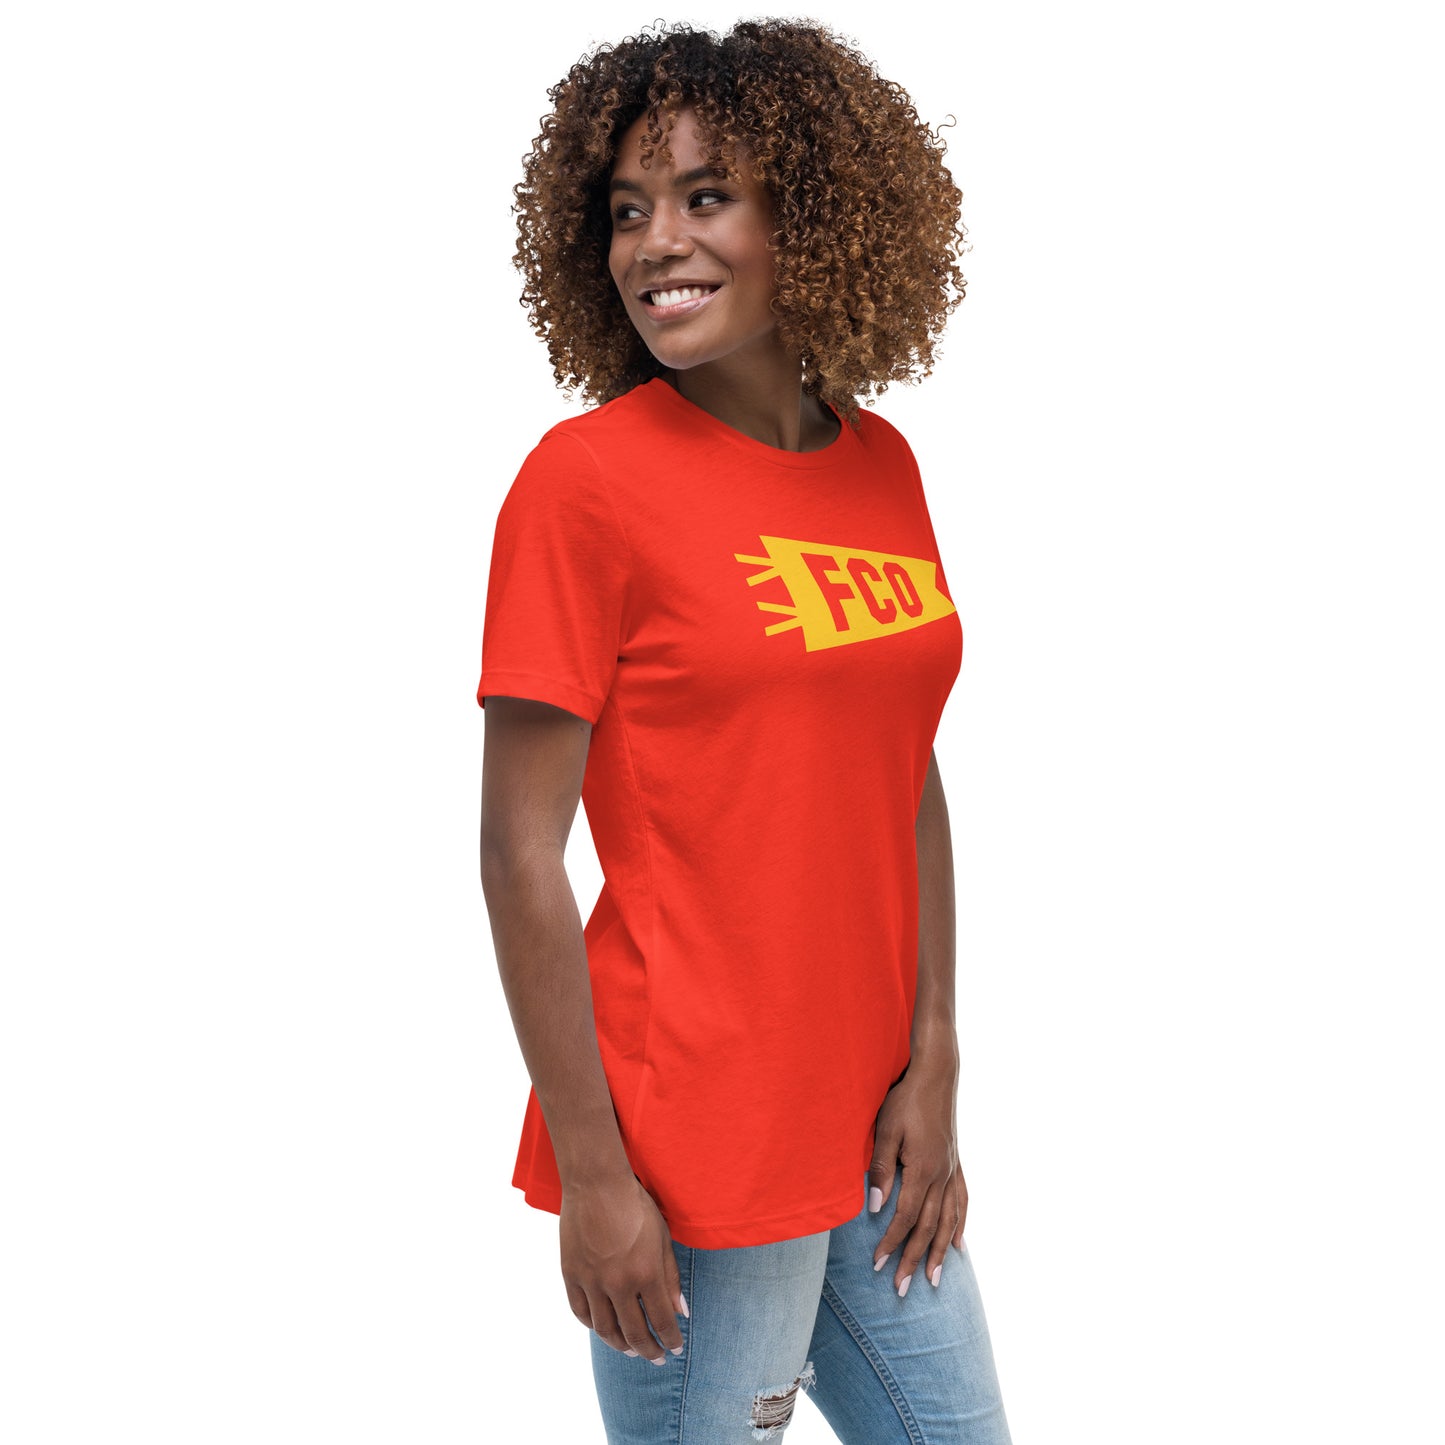 Airport Code Women's Tee - Yellow Graphic • FCO Rome • YHM Designs - Image 03